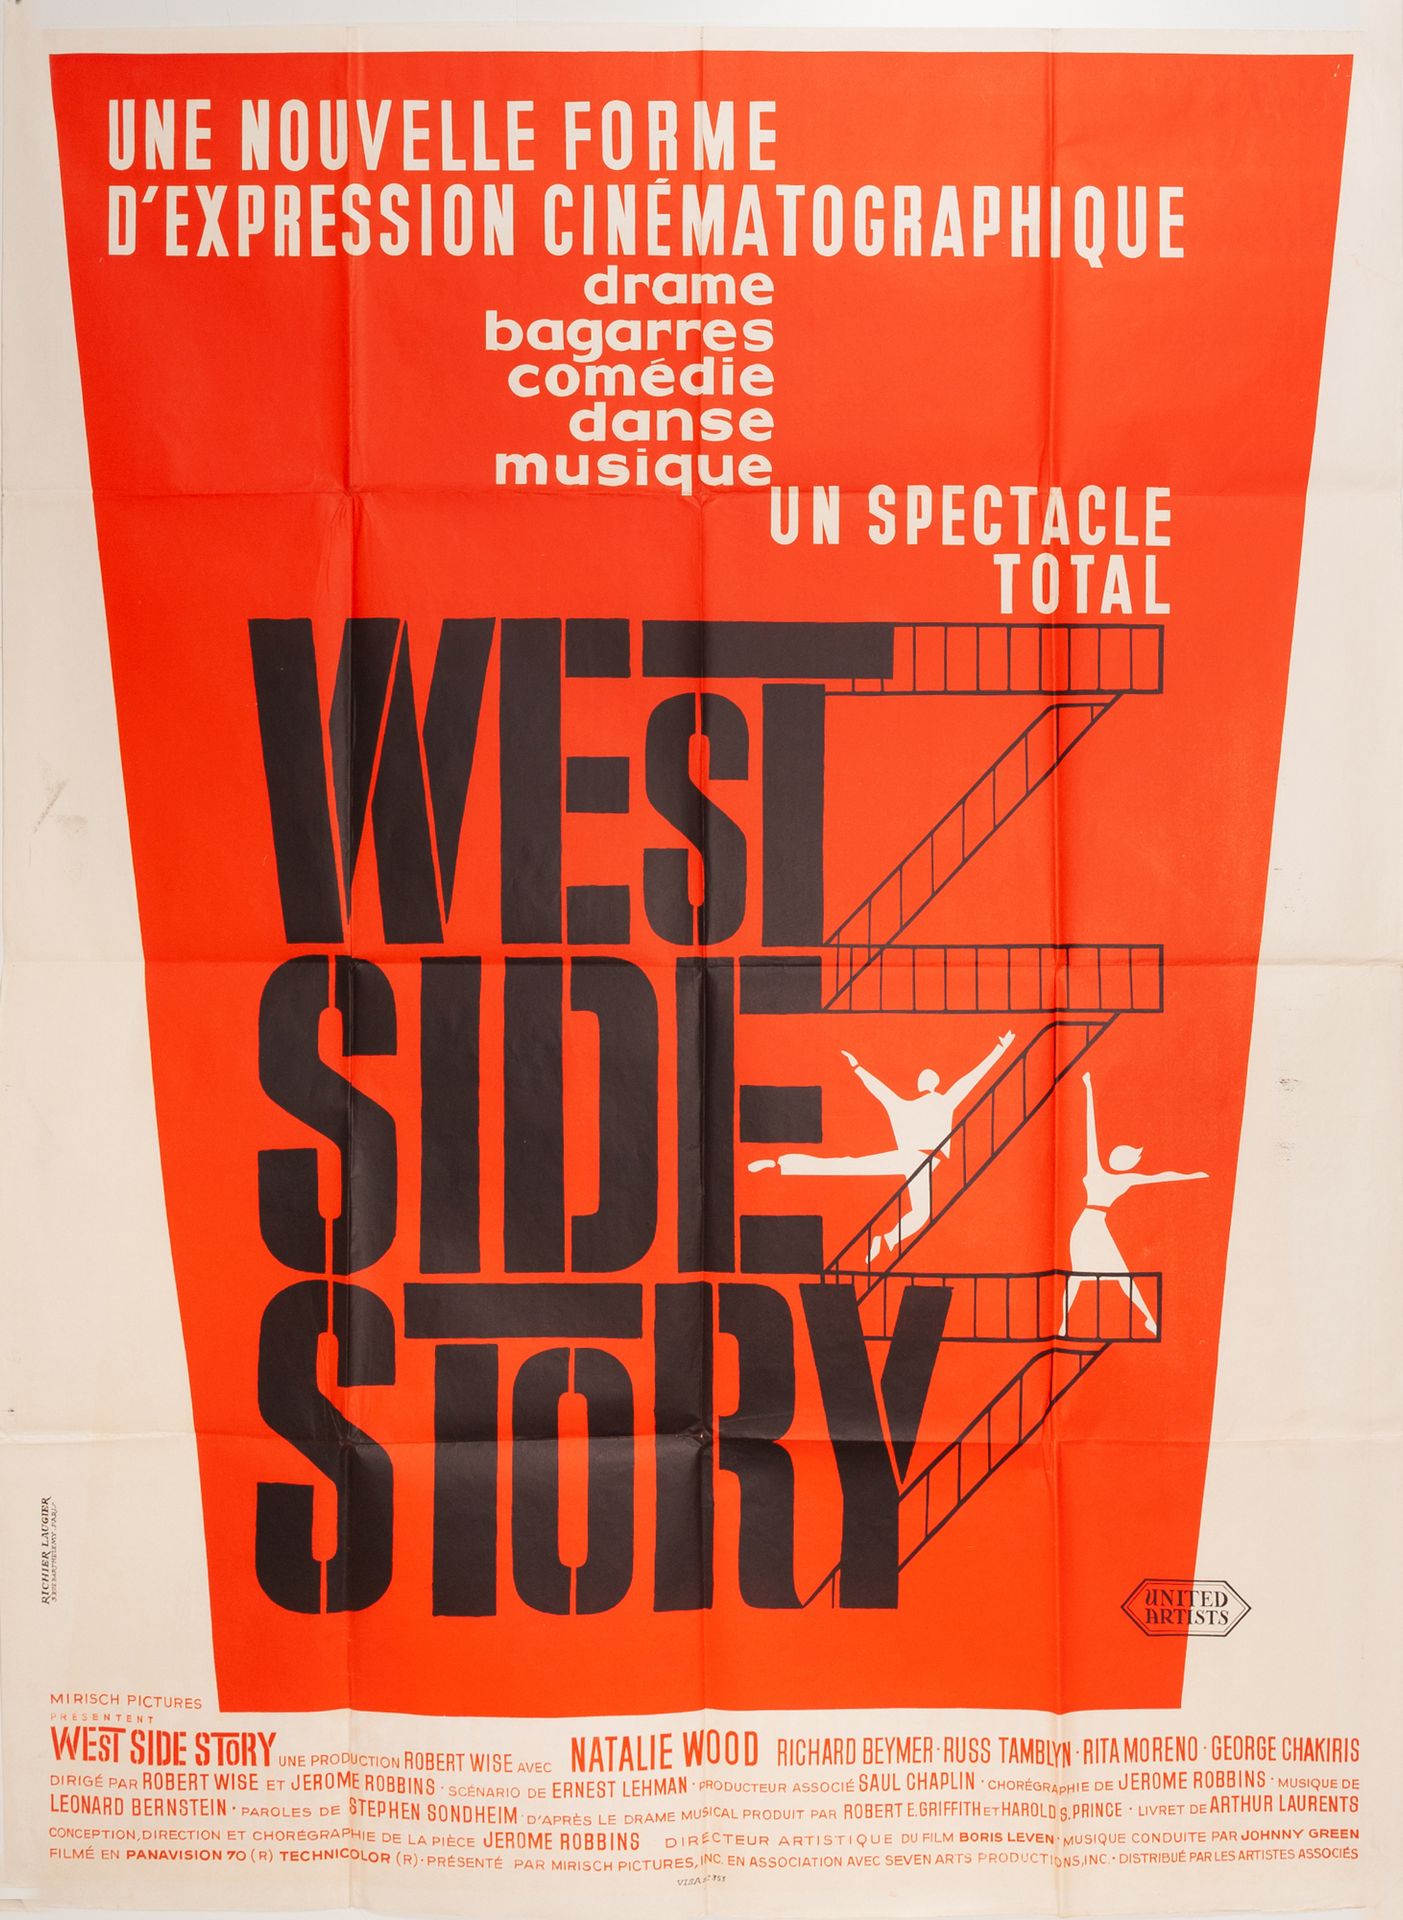 Null WEST SIDE STORY Robert Wise. 1961.
120 x 160 cm. Affiche française. Non sig&hellip;